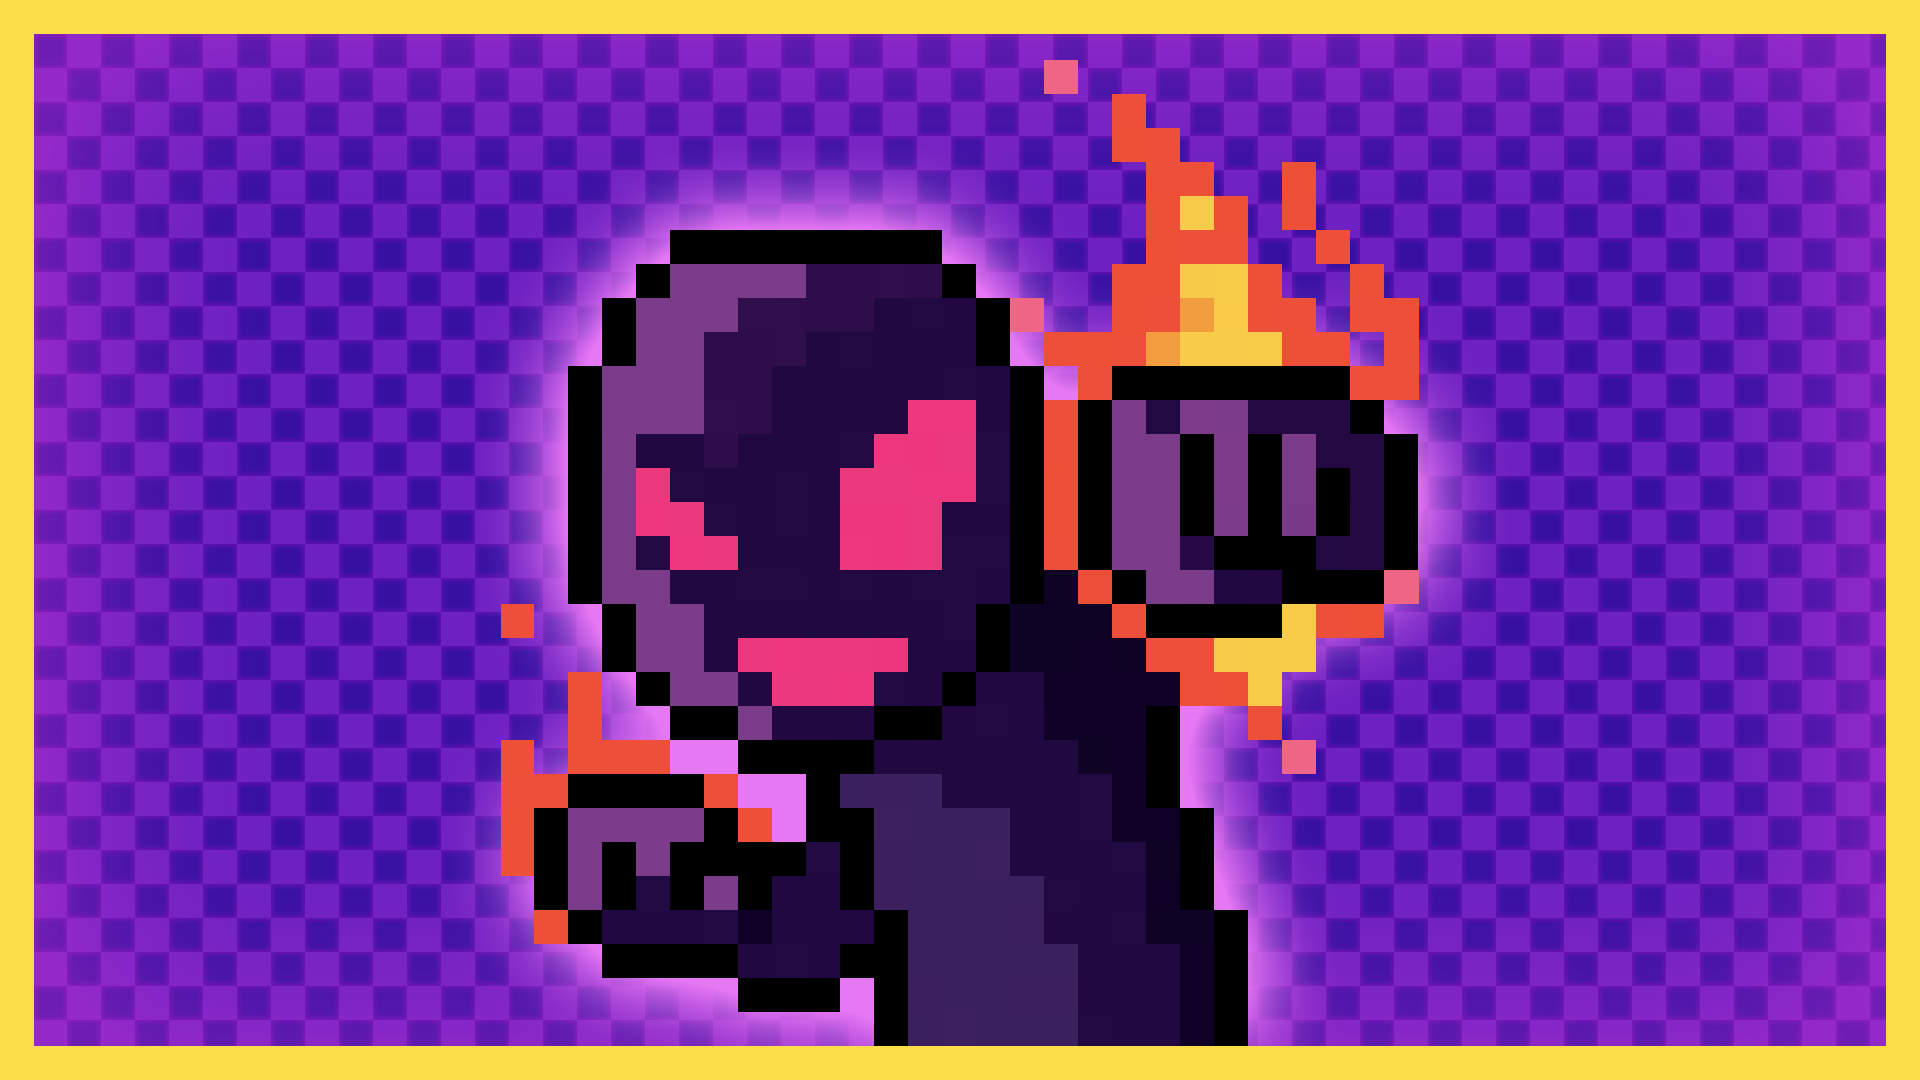 Icon for Action Supremacist